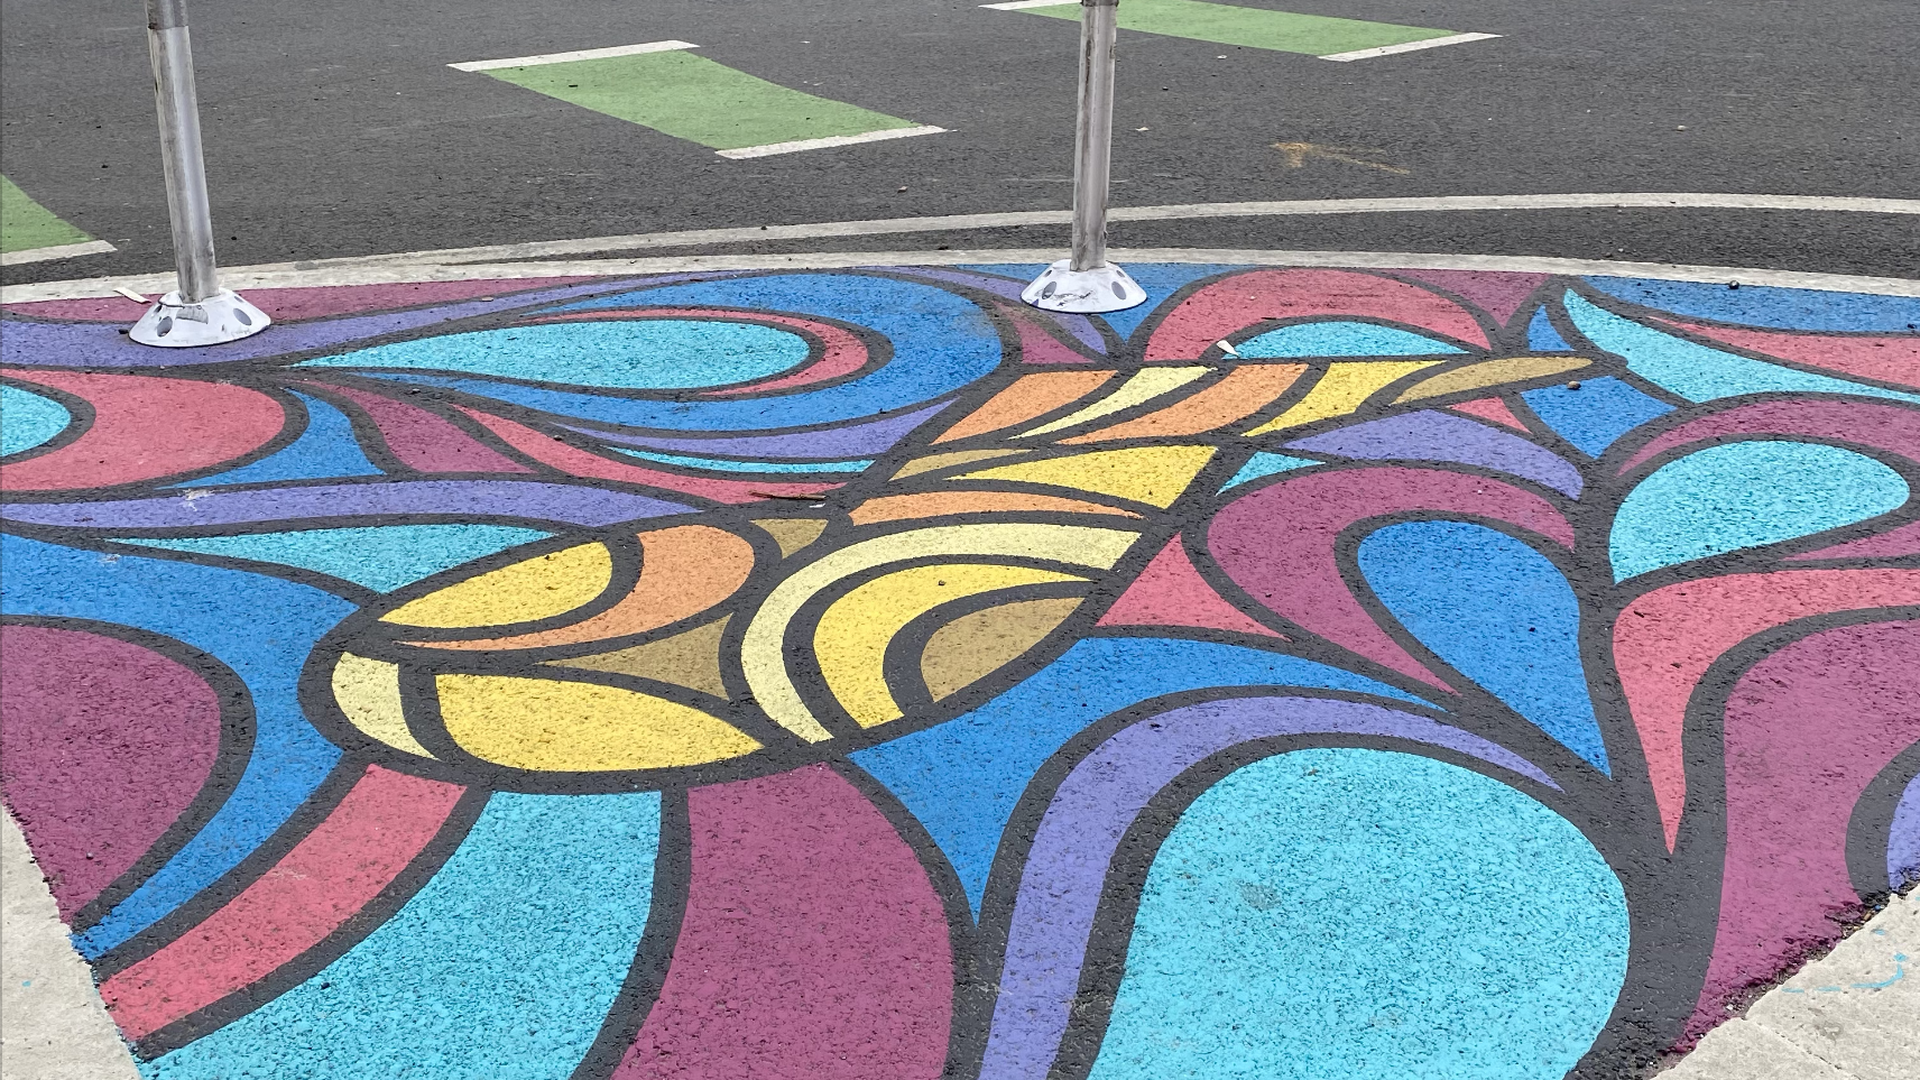 A ground mural of brightly painted, abstract shapes on 8th and V NW in D.C. One white car is in the background.